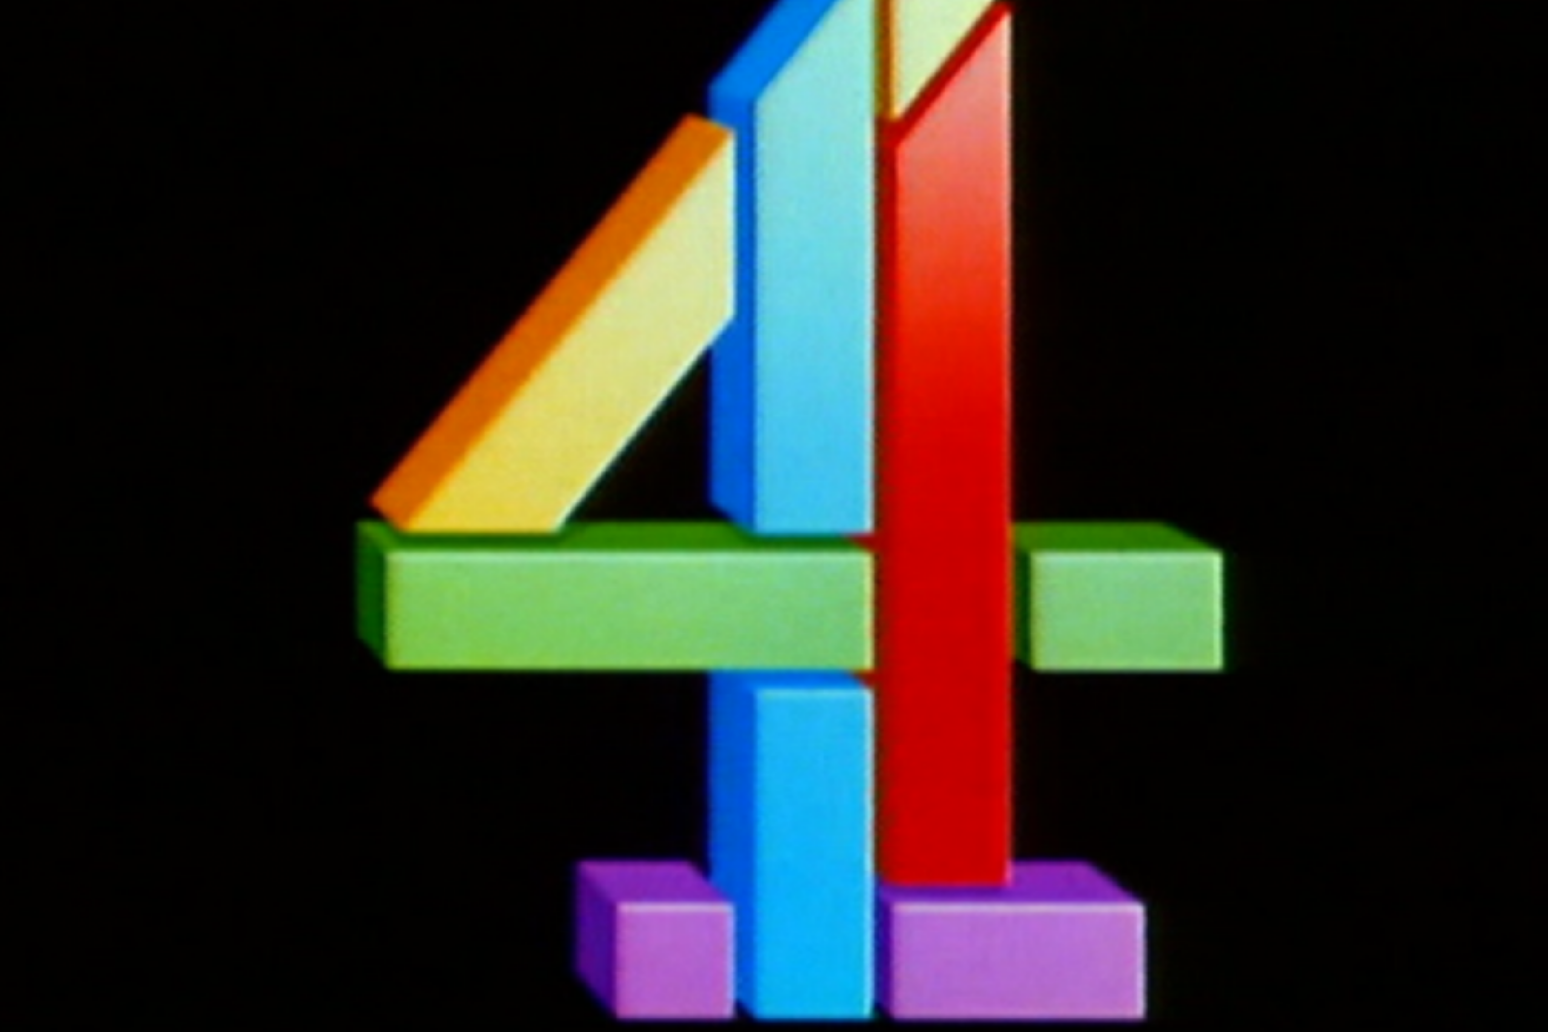 Channel 4 is not left-wing, chief executive says 